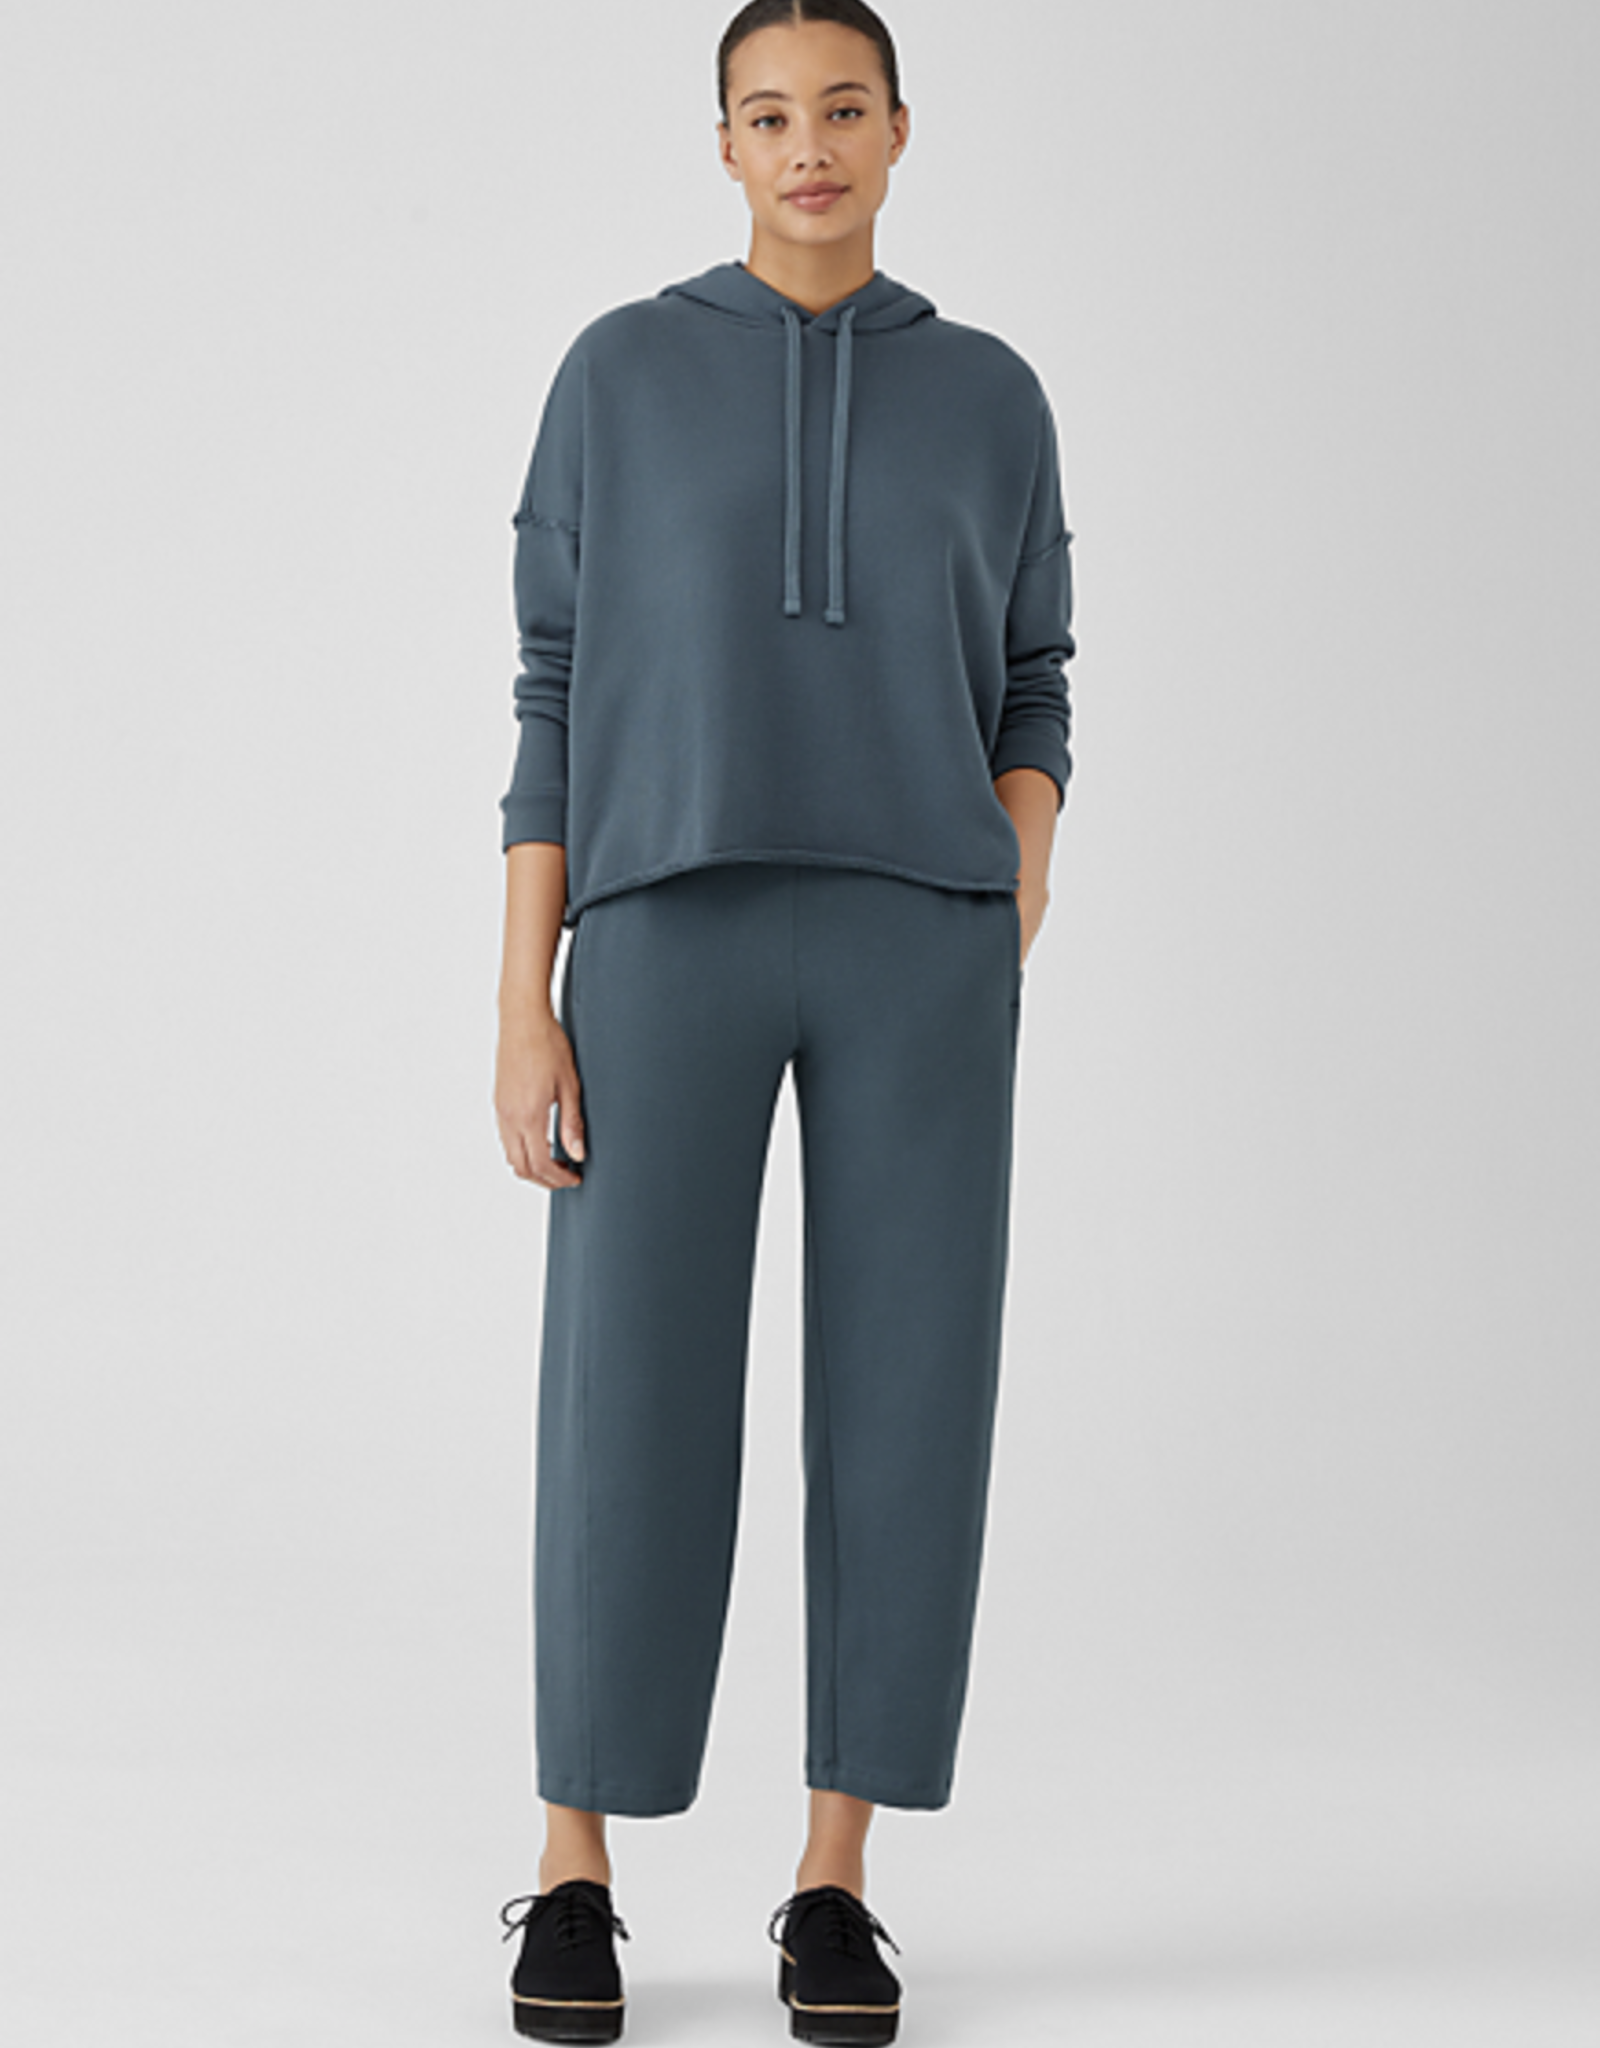 Eileen Fisher Lantern Ankle Pant